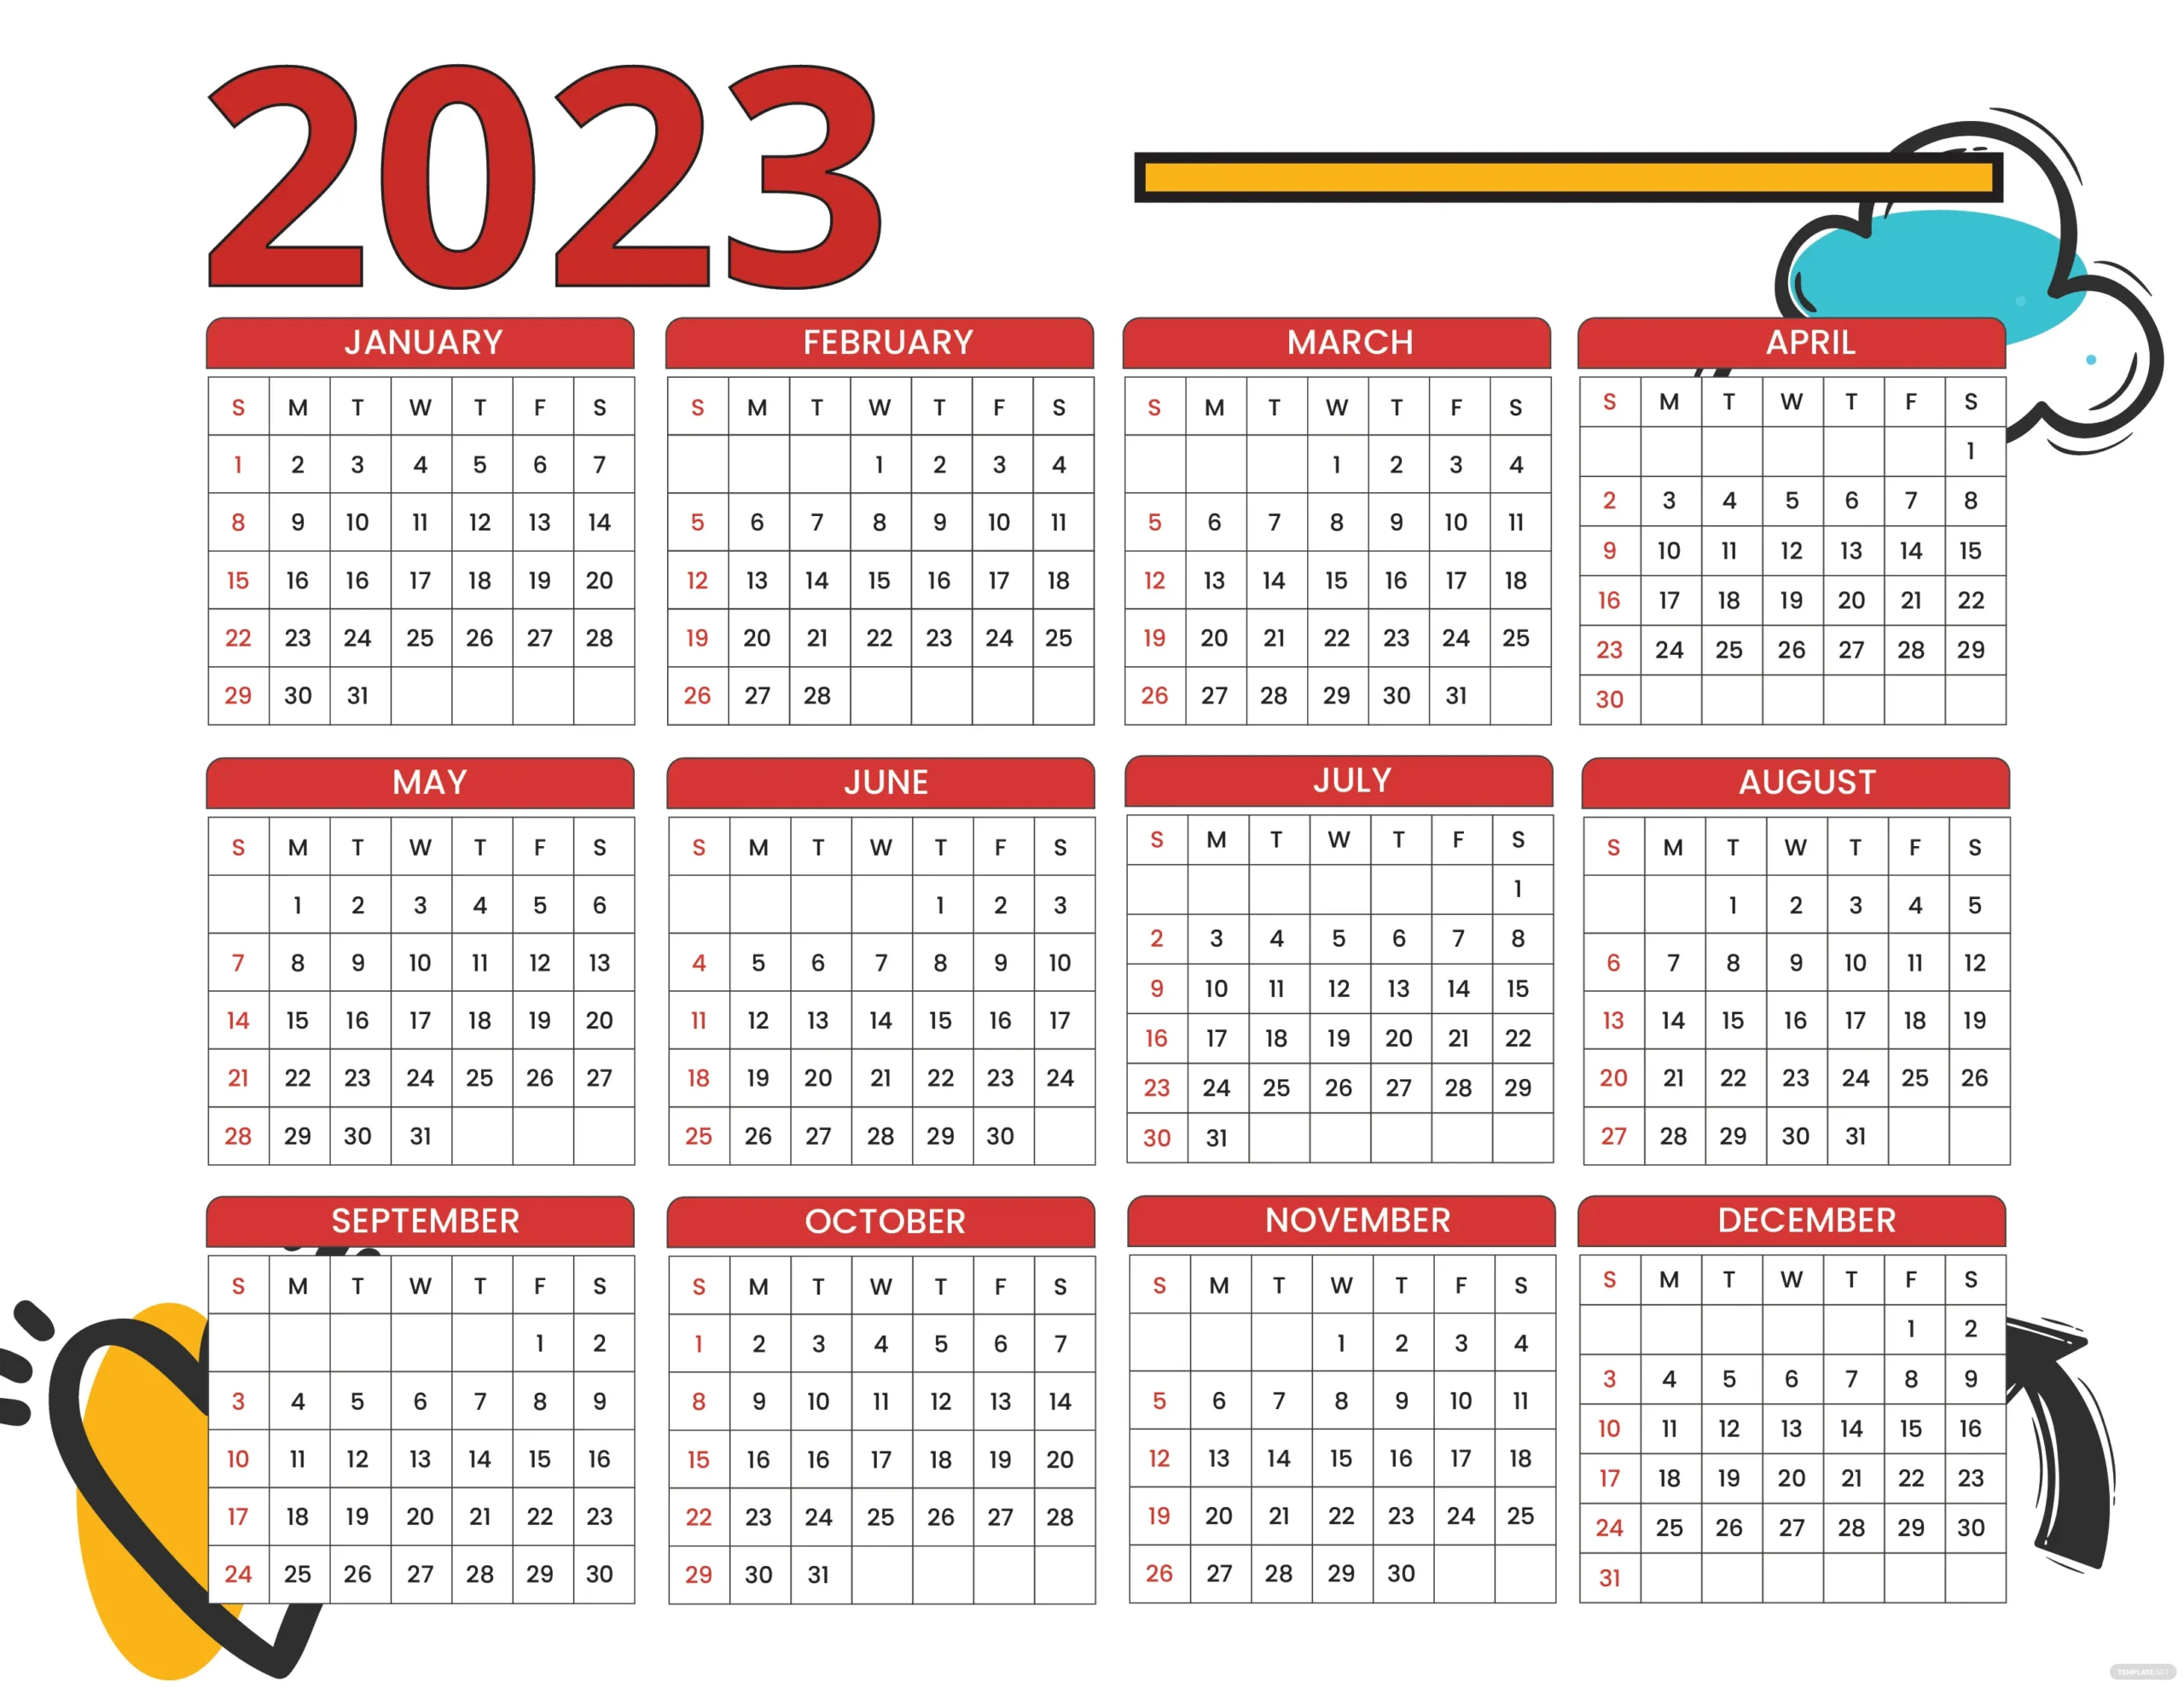 2023 Calendar Templates  Everything You Need to Get Organized for the New Year